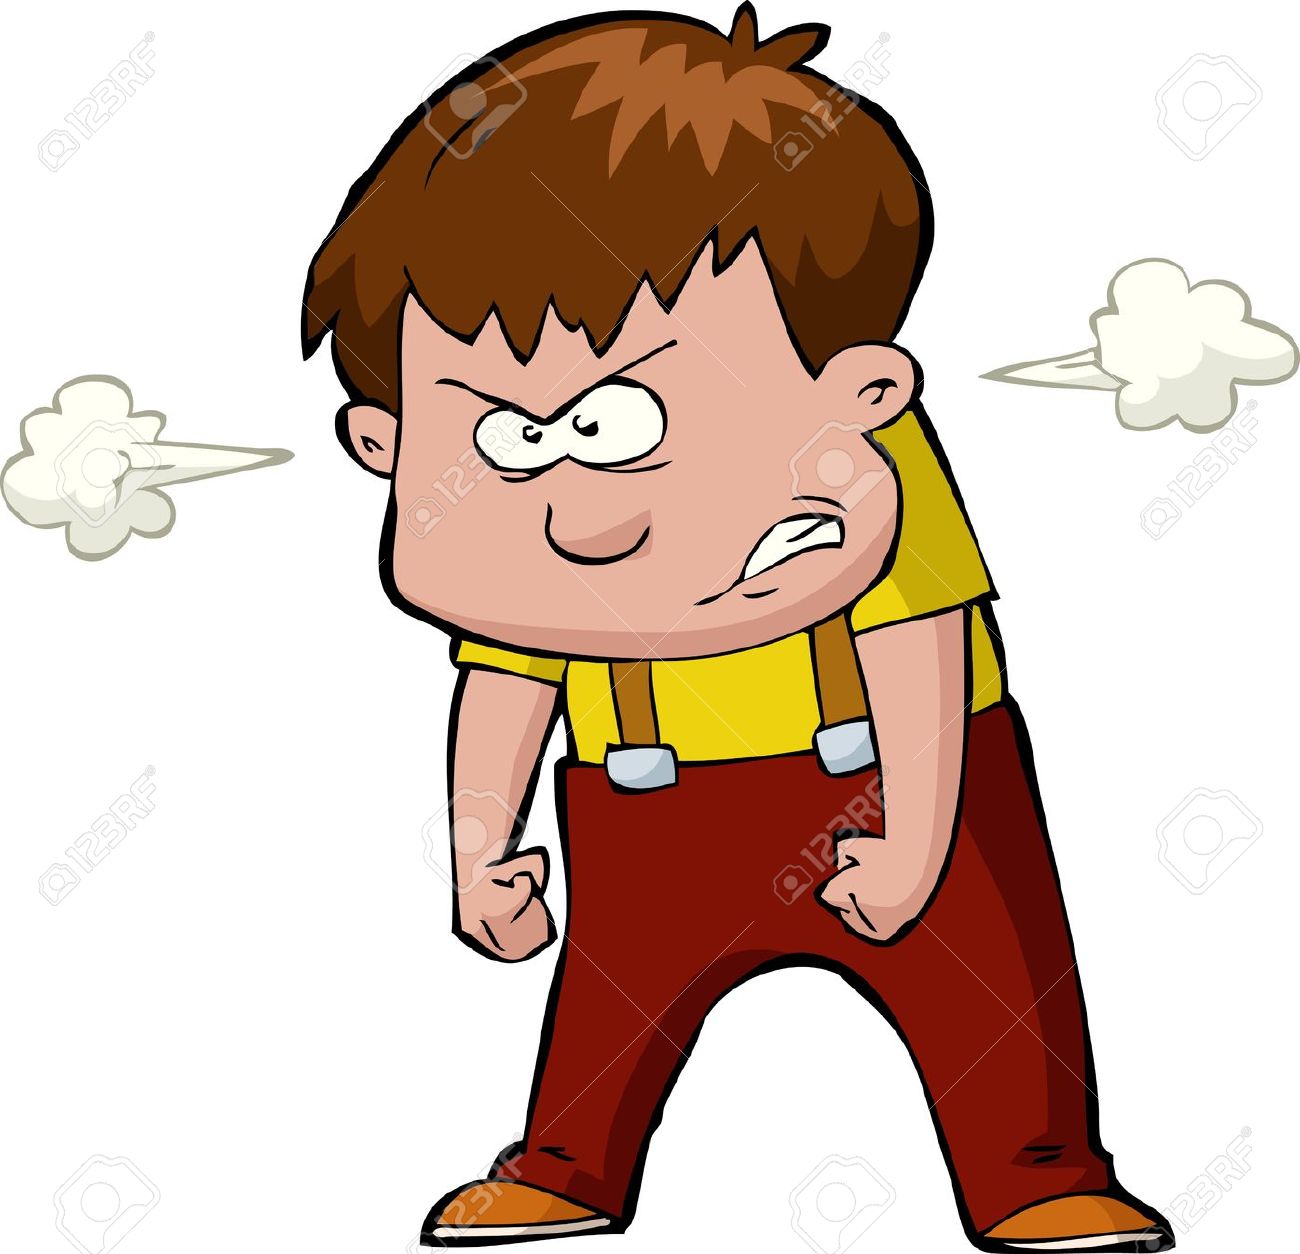 Anger Clip Art Pictures.